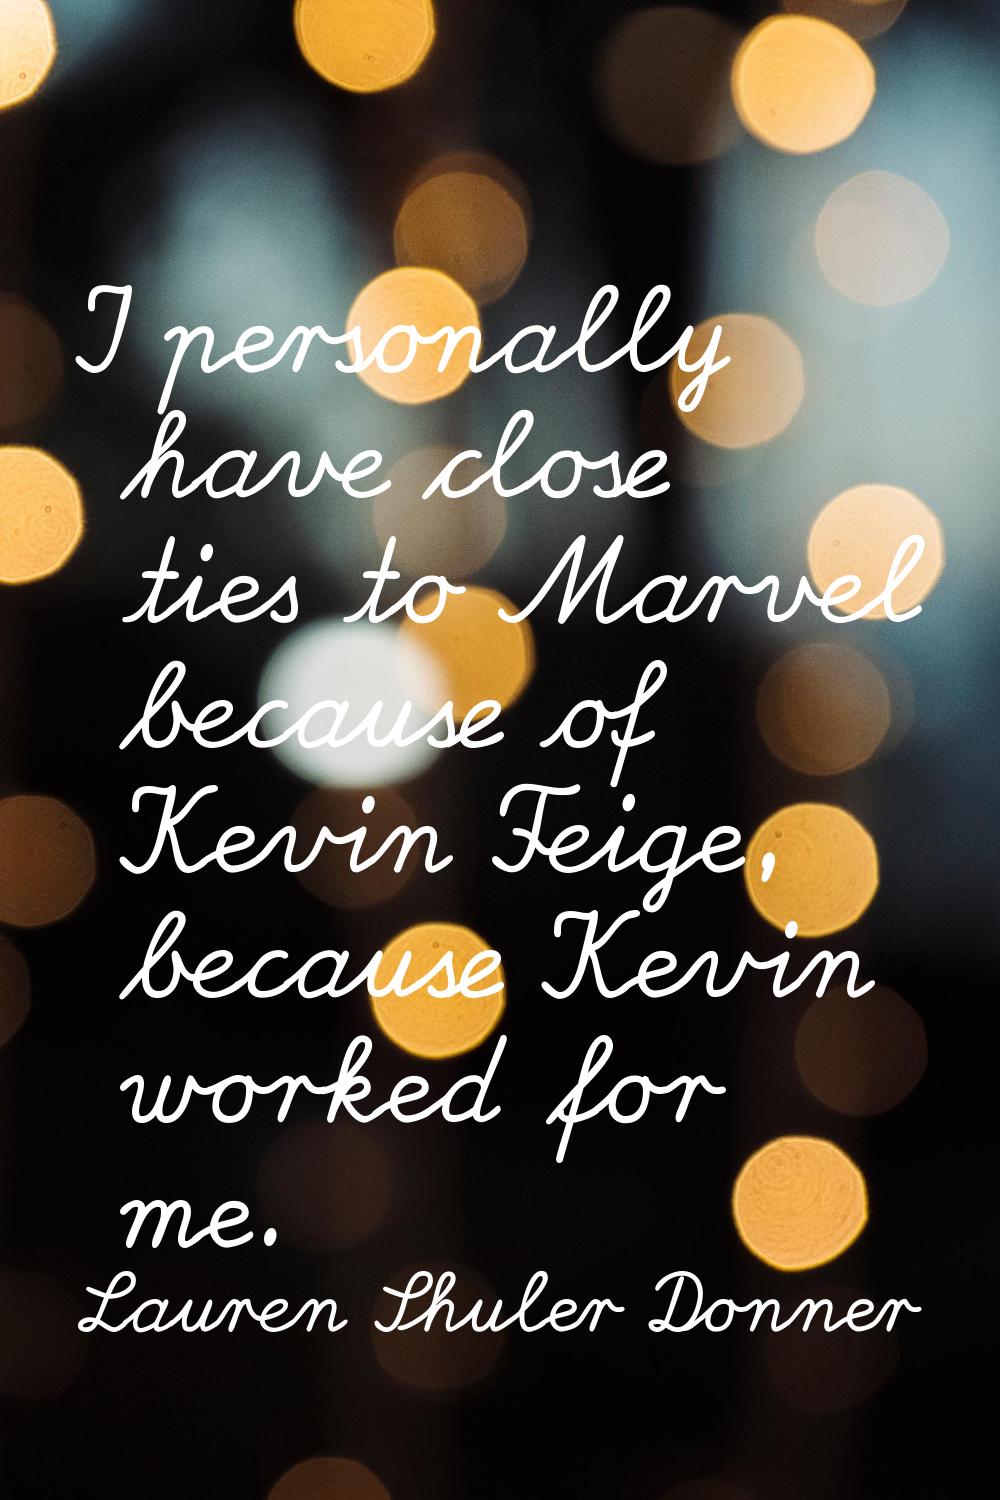 I personally have close ties to Marvel because of Kevin Feige, because Kevin worked for me.